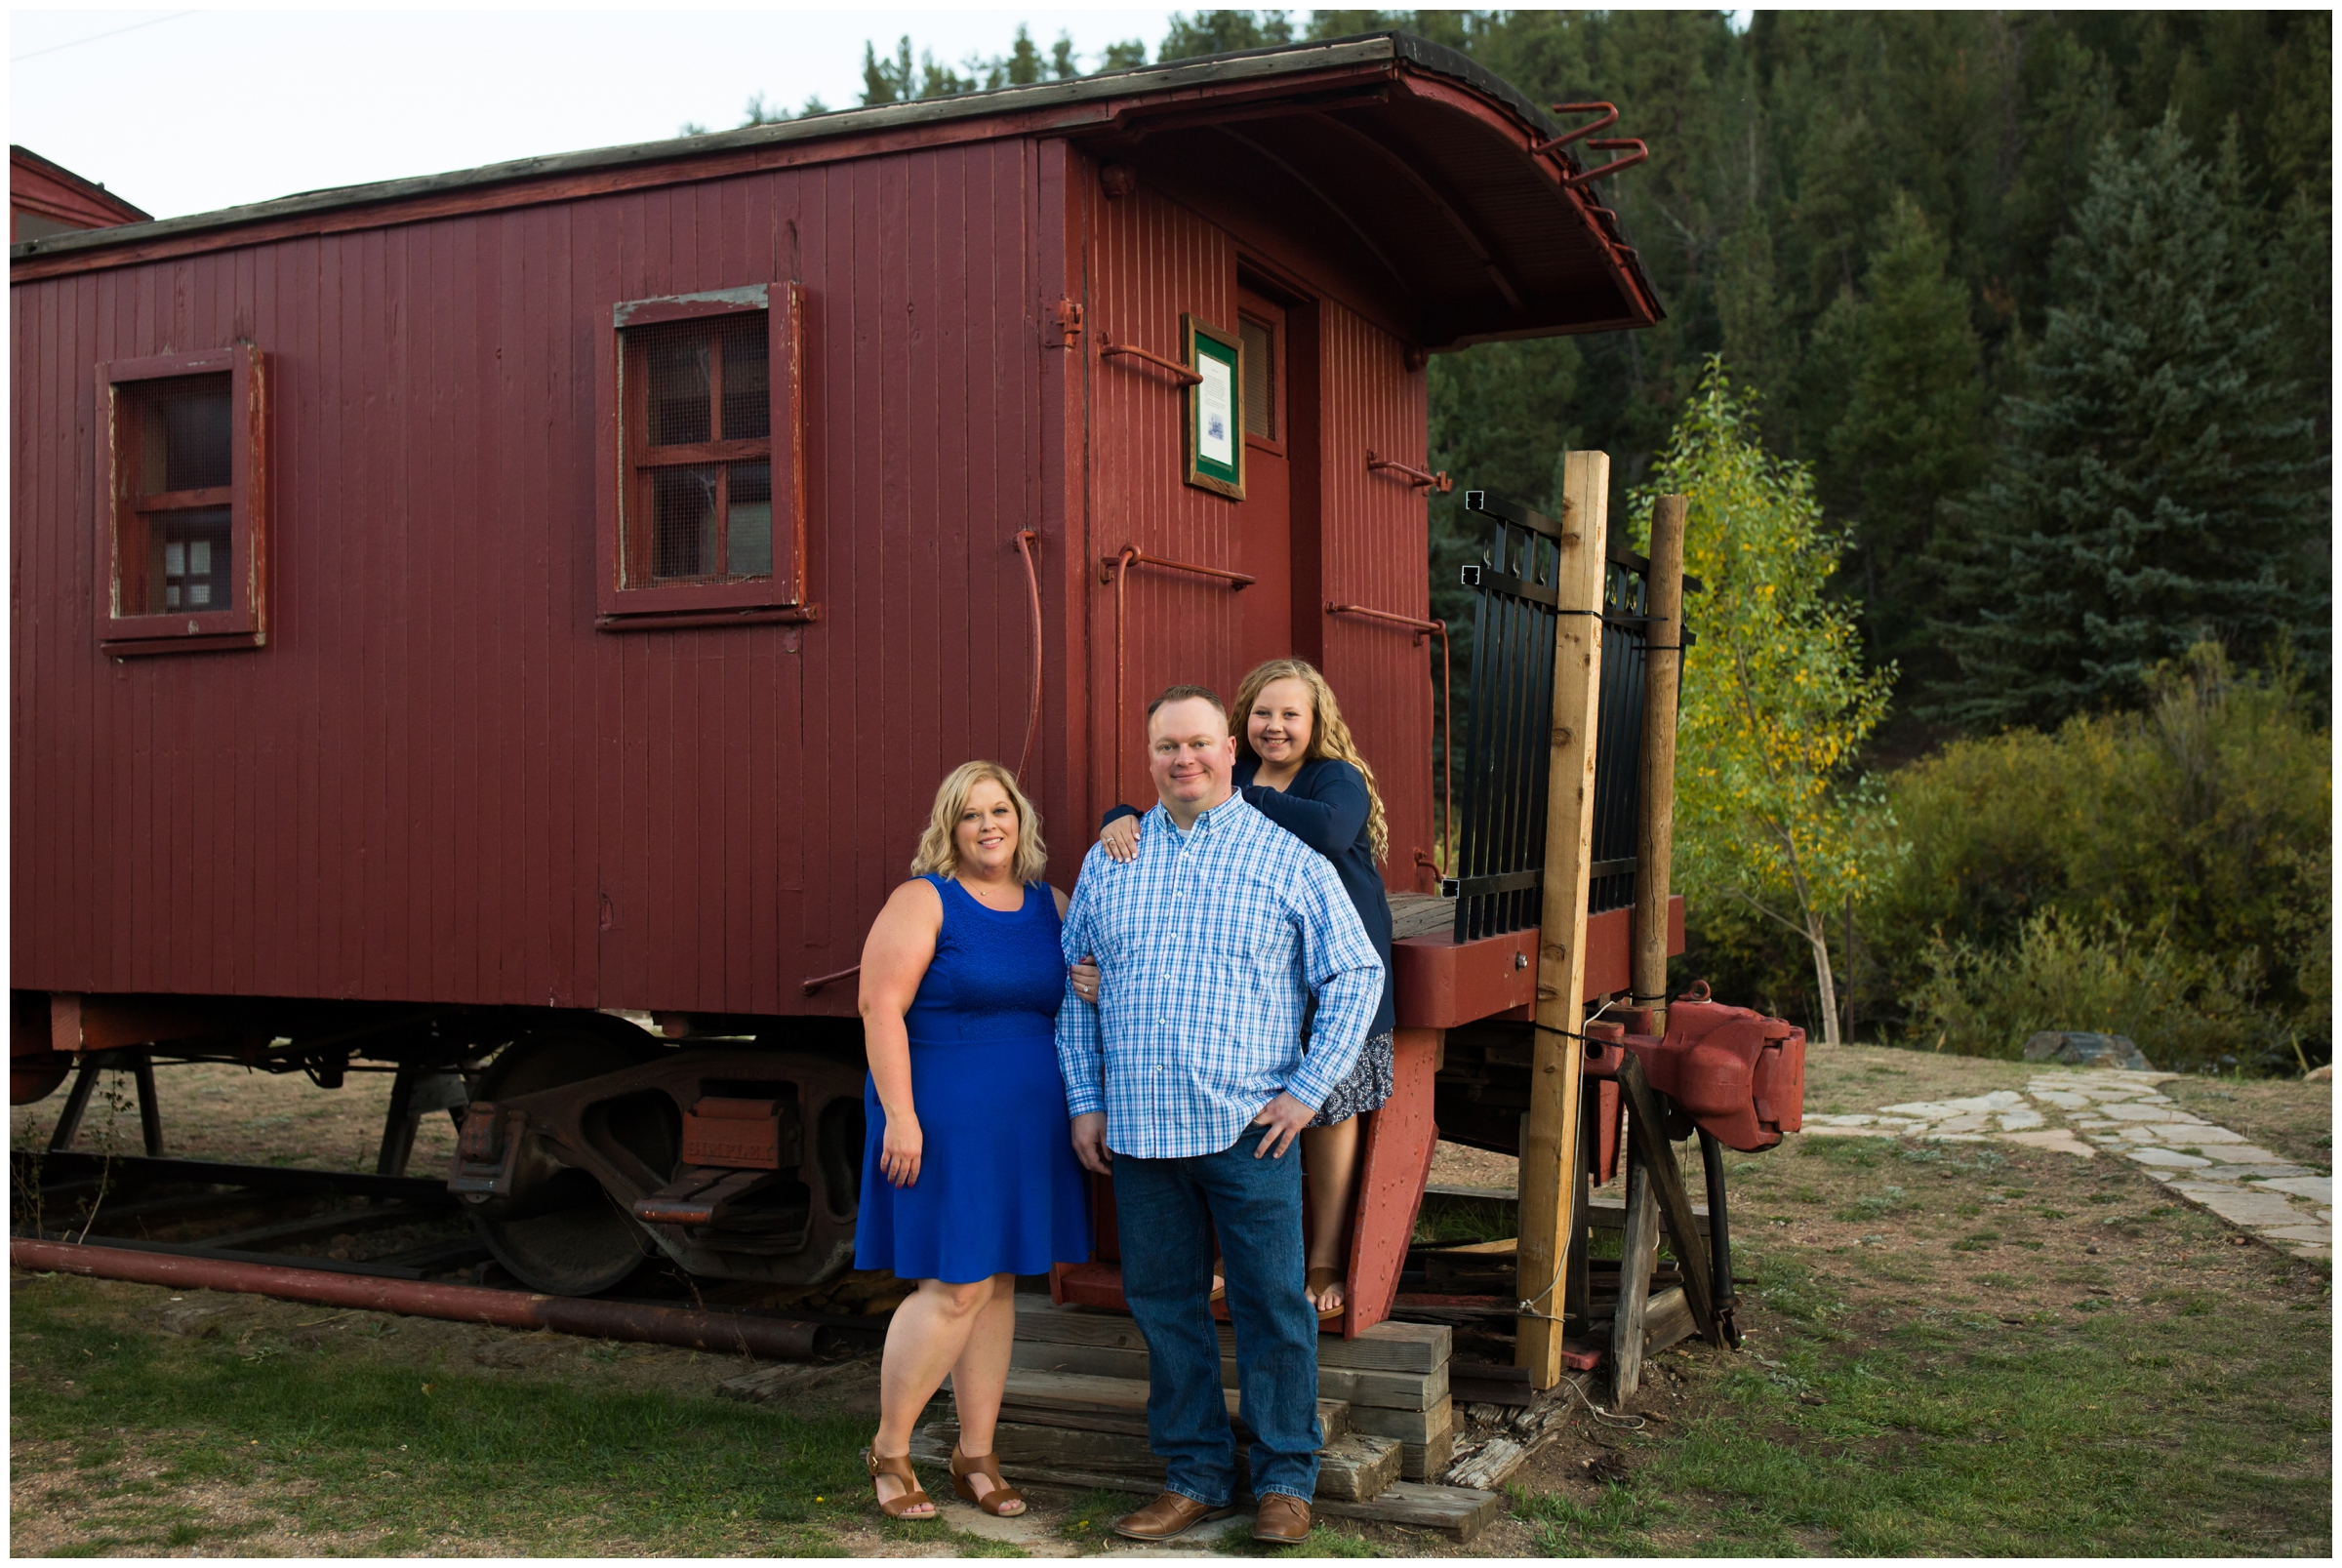 Colorado family portraits at McGraw Memorial Park Bailey with train car in background 